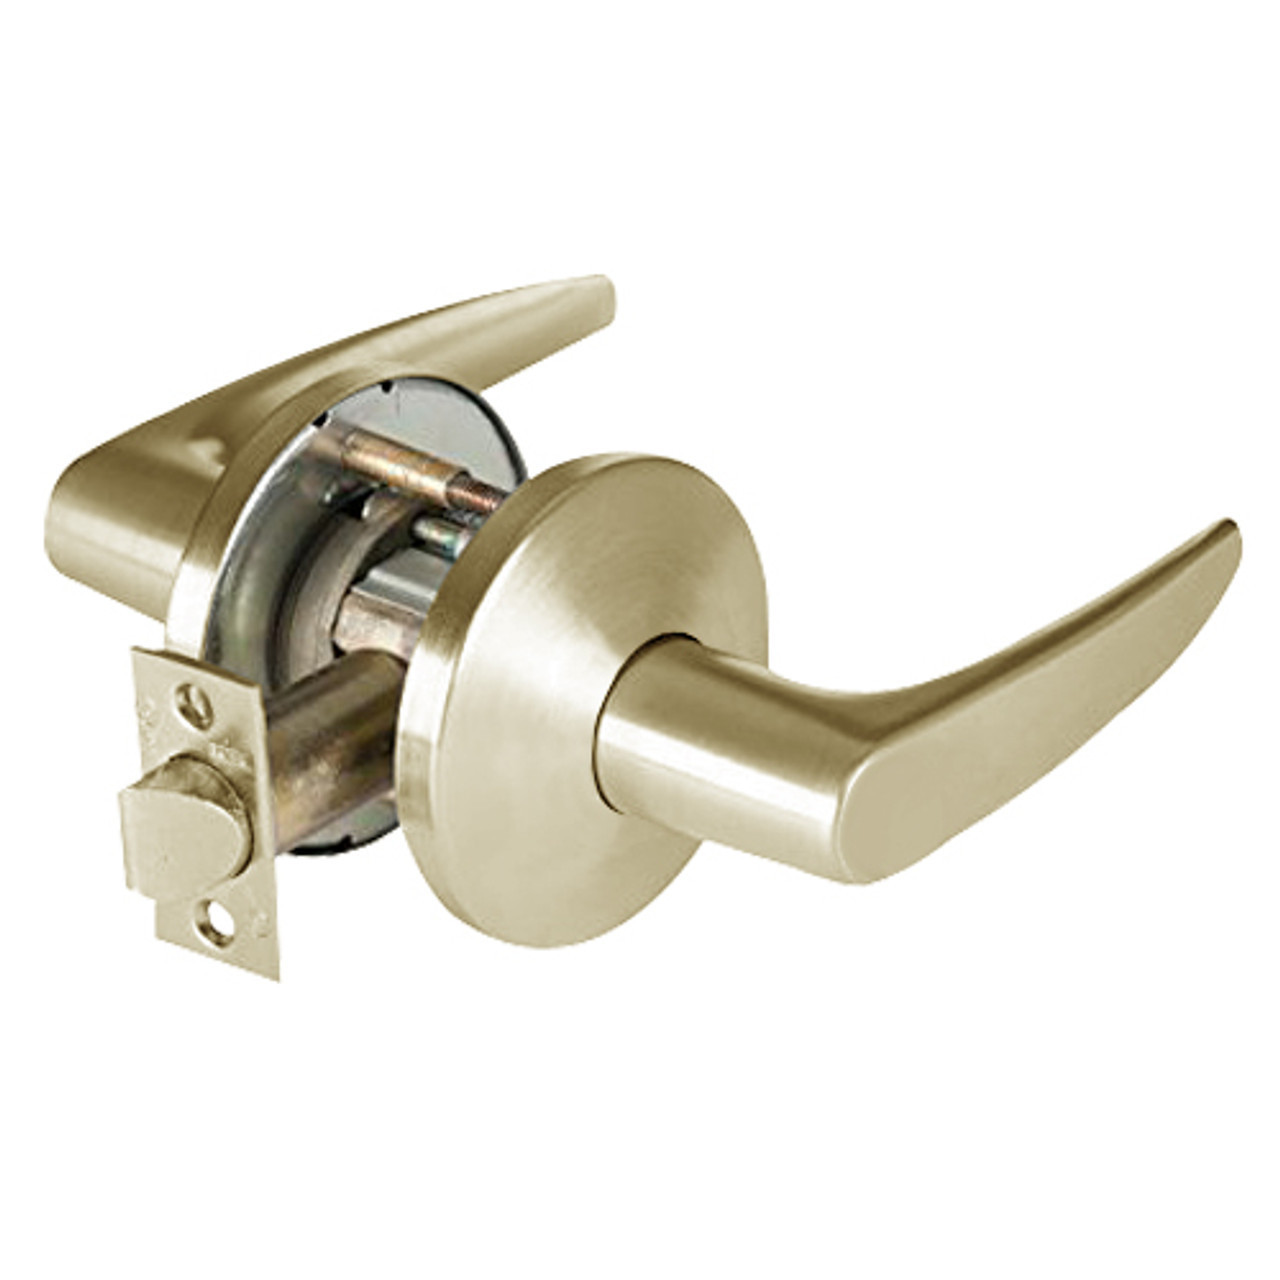 9K50N16LS3606LM Best 9K Series Passage Heavy Duty Cylindrical Lever Locks with Curved Without Return Lever Design in Satin Brass